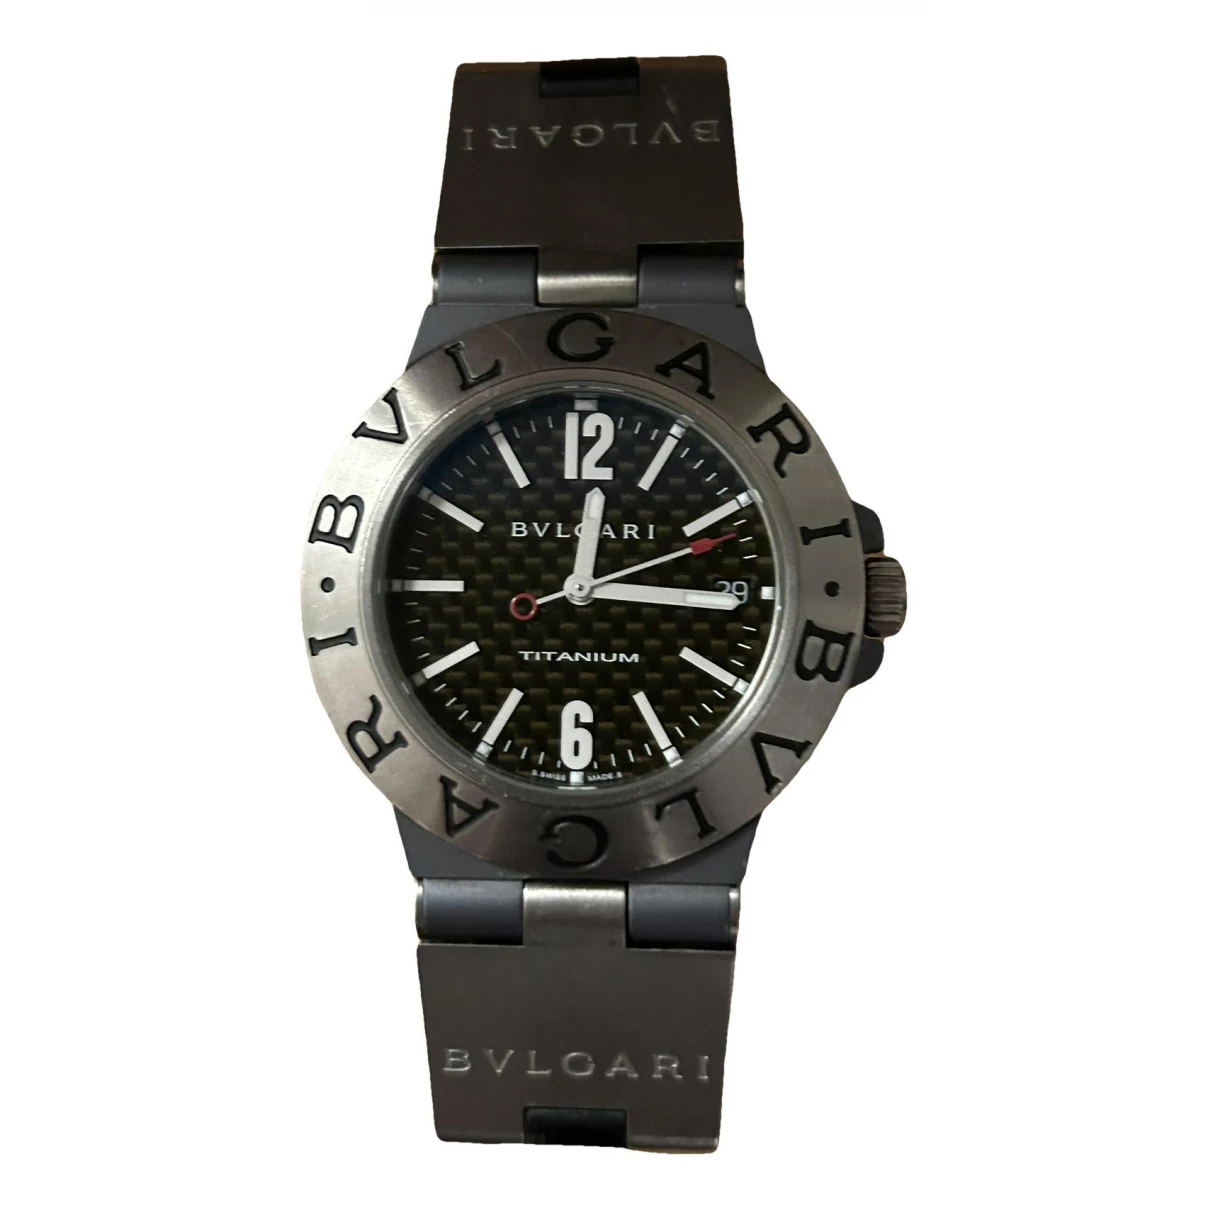 accessories Bvlgari watches for Male Steel. Used condition